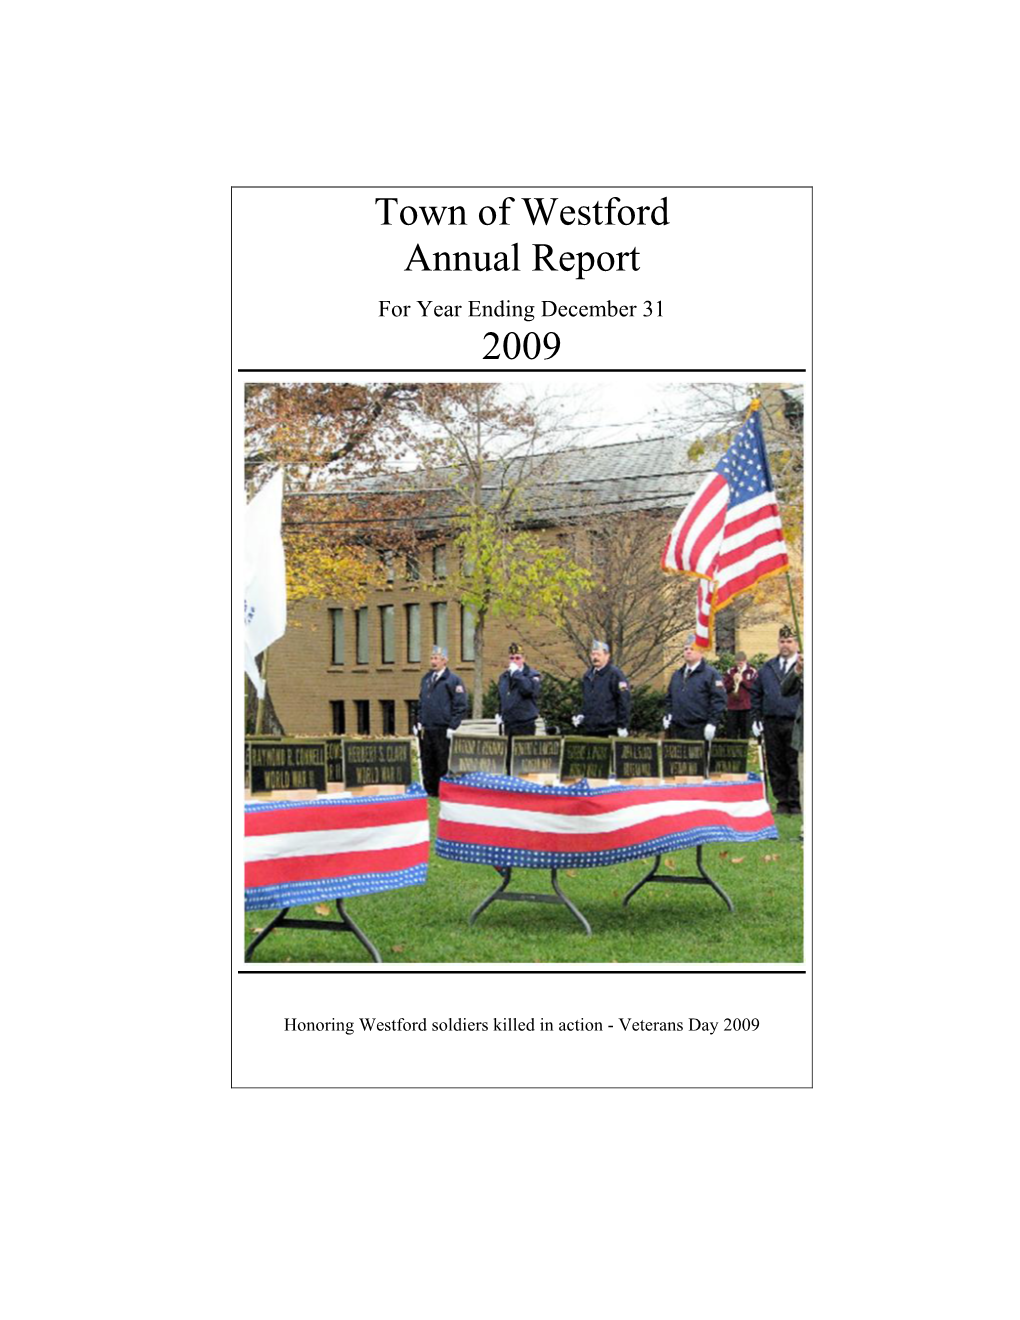 Town of Westford Annual Report 2009